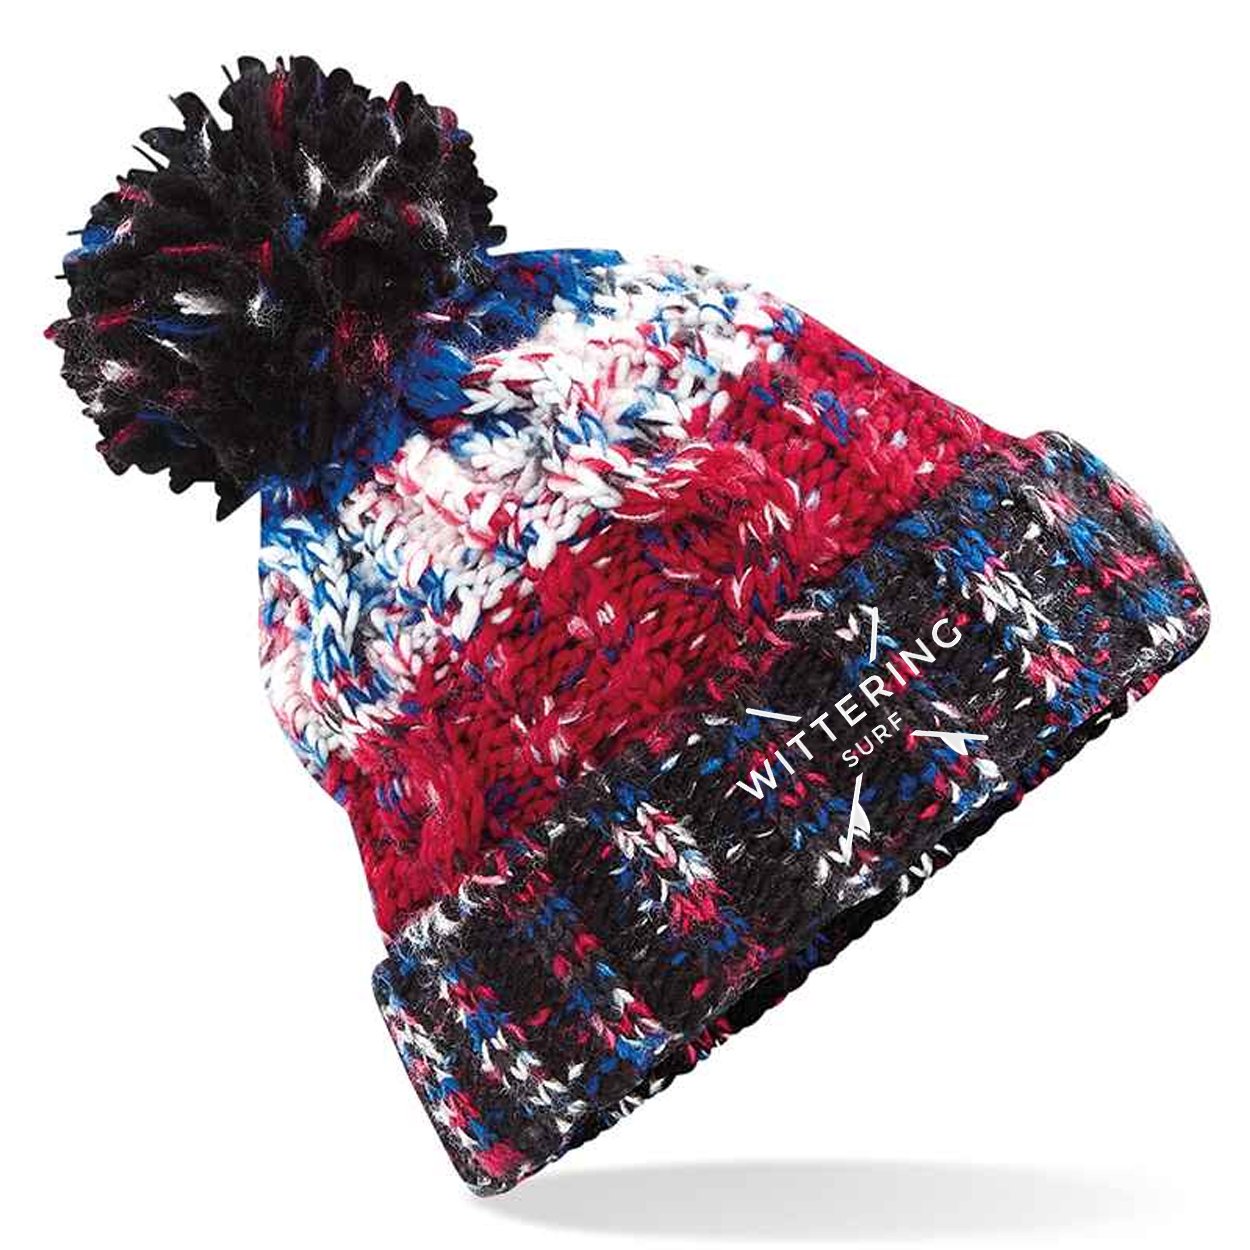 CORKSCREW RINSE BEANIE - RED/WHITE/BLUE - Wittering Surf Shop